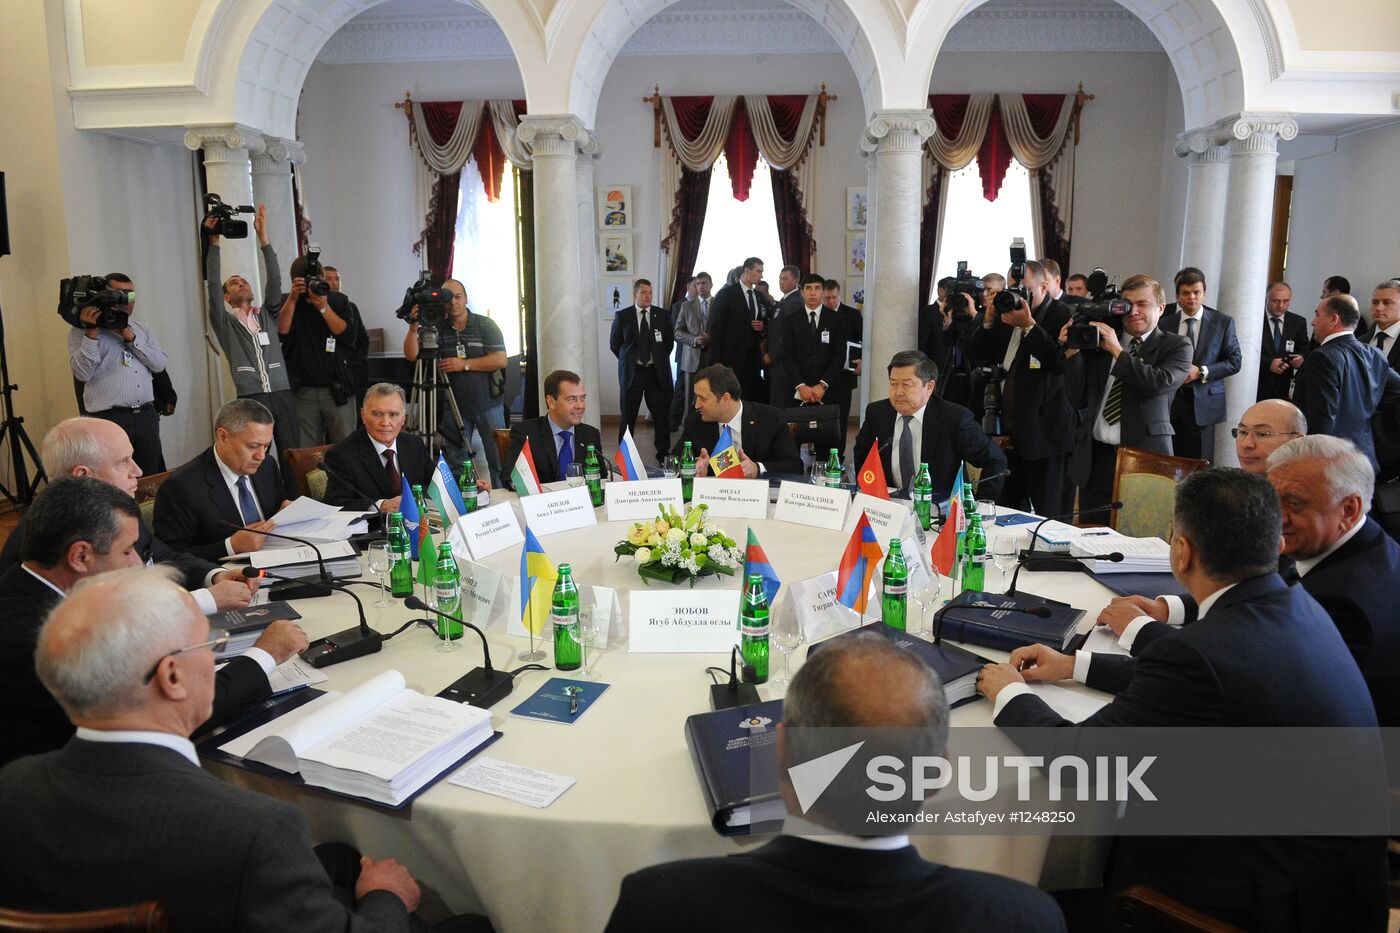 Council of CIS Heads of Governments in Yalta